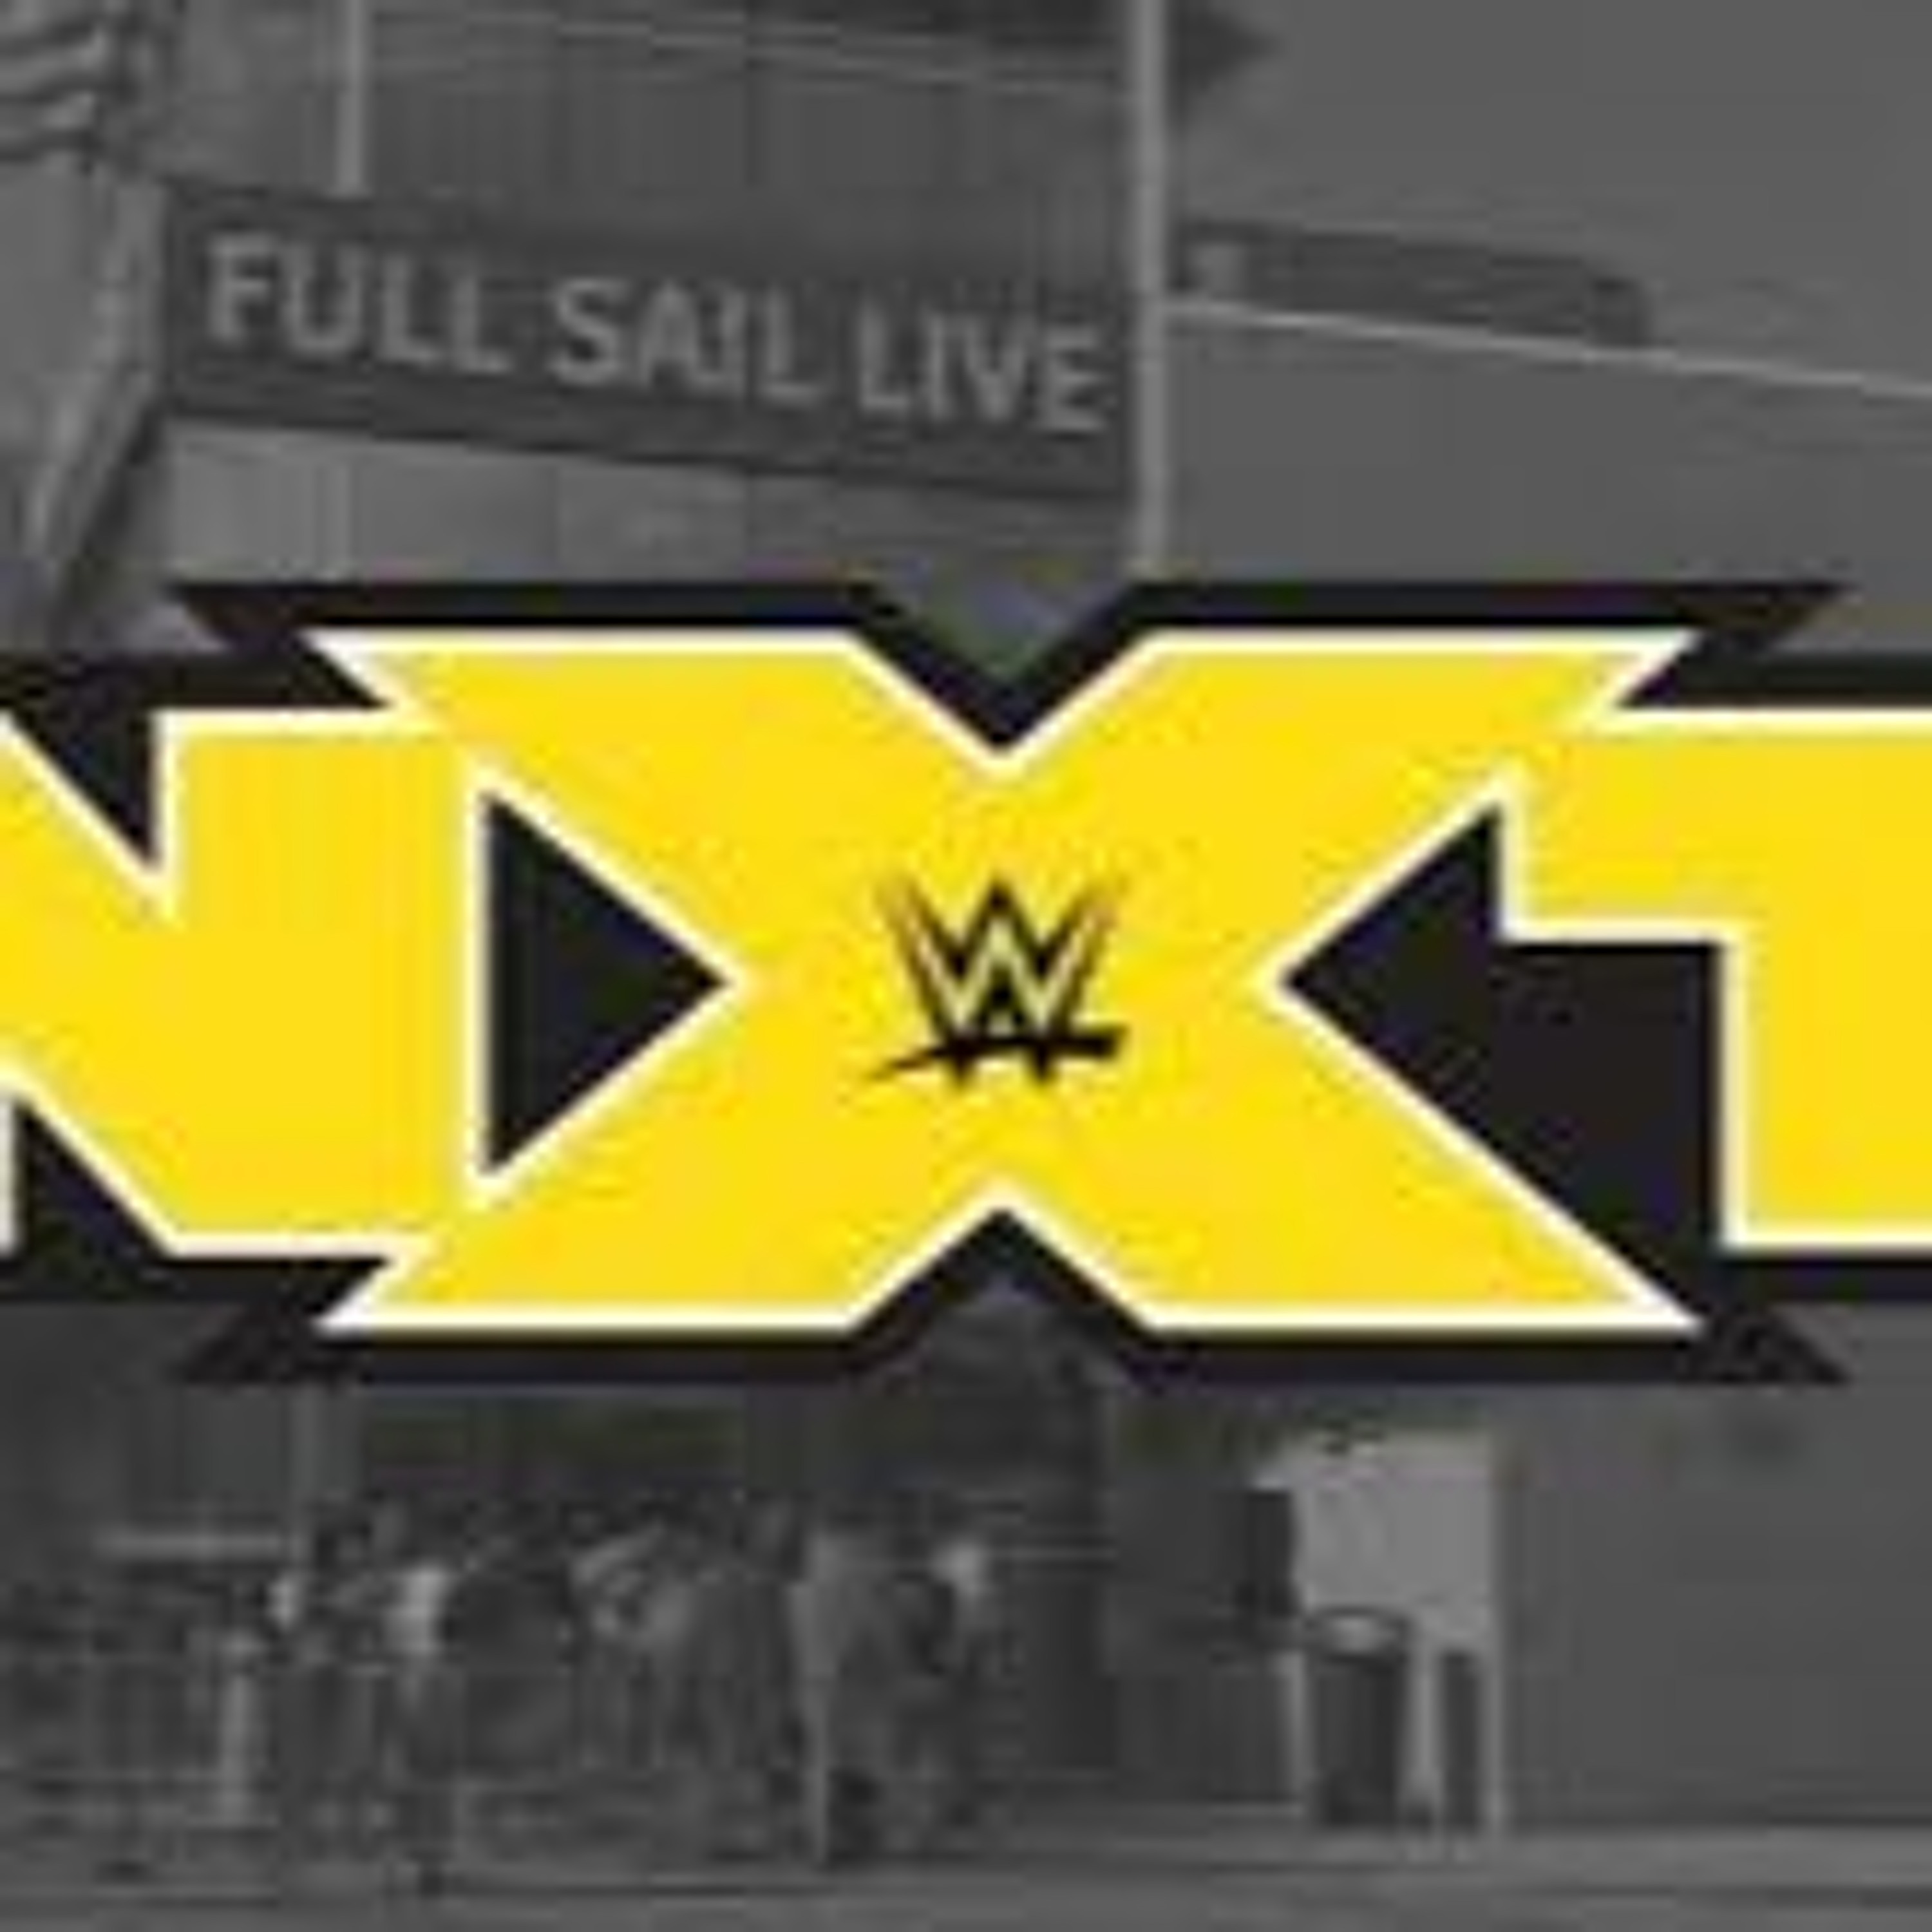 WE TALK NXT EP.141 |Takeover With The Originals and Late Birthday 10/21/18|